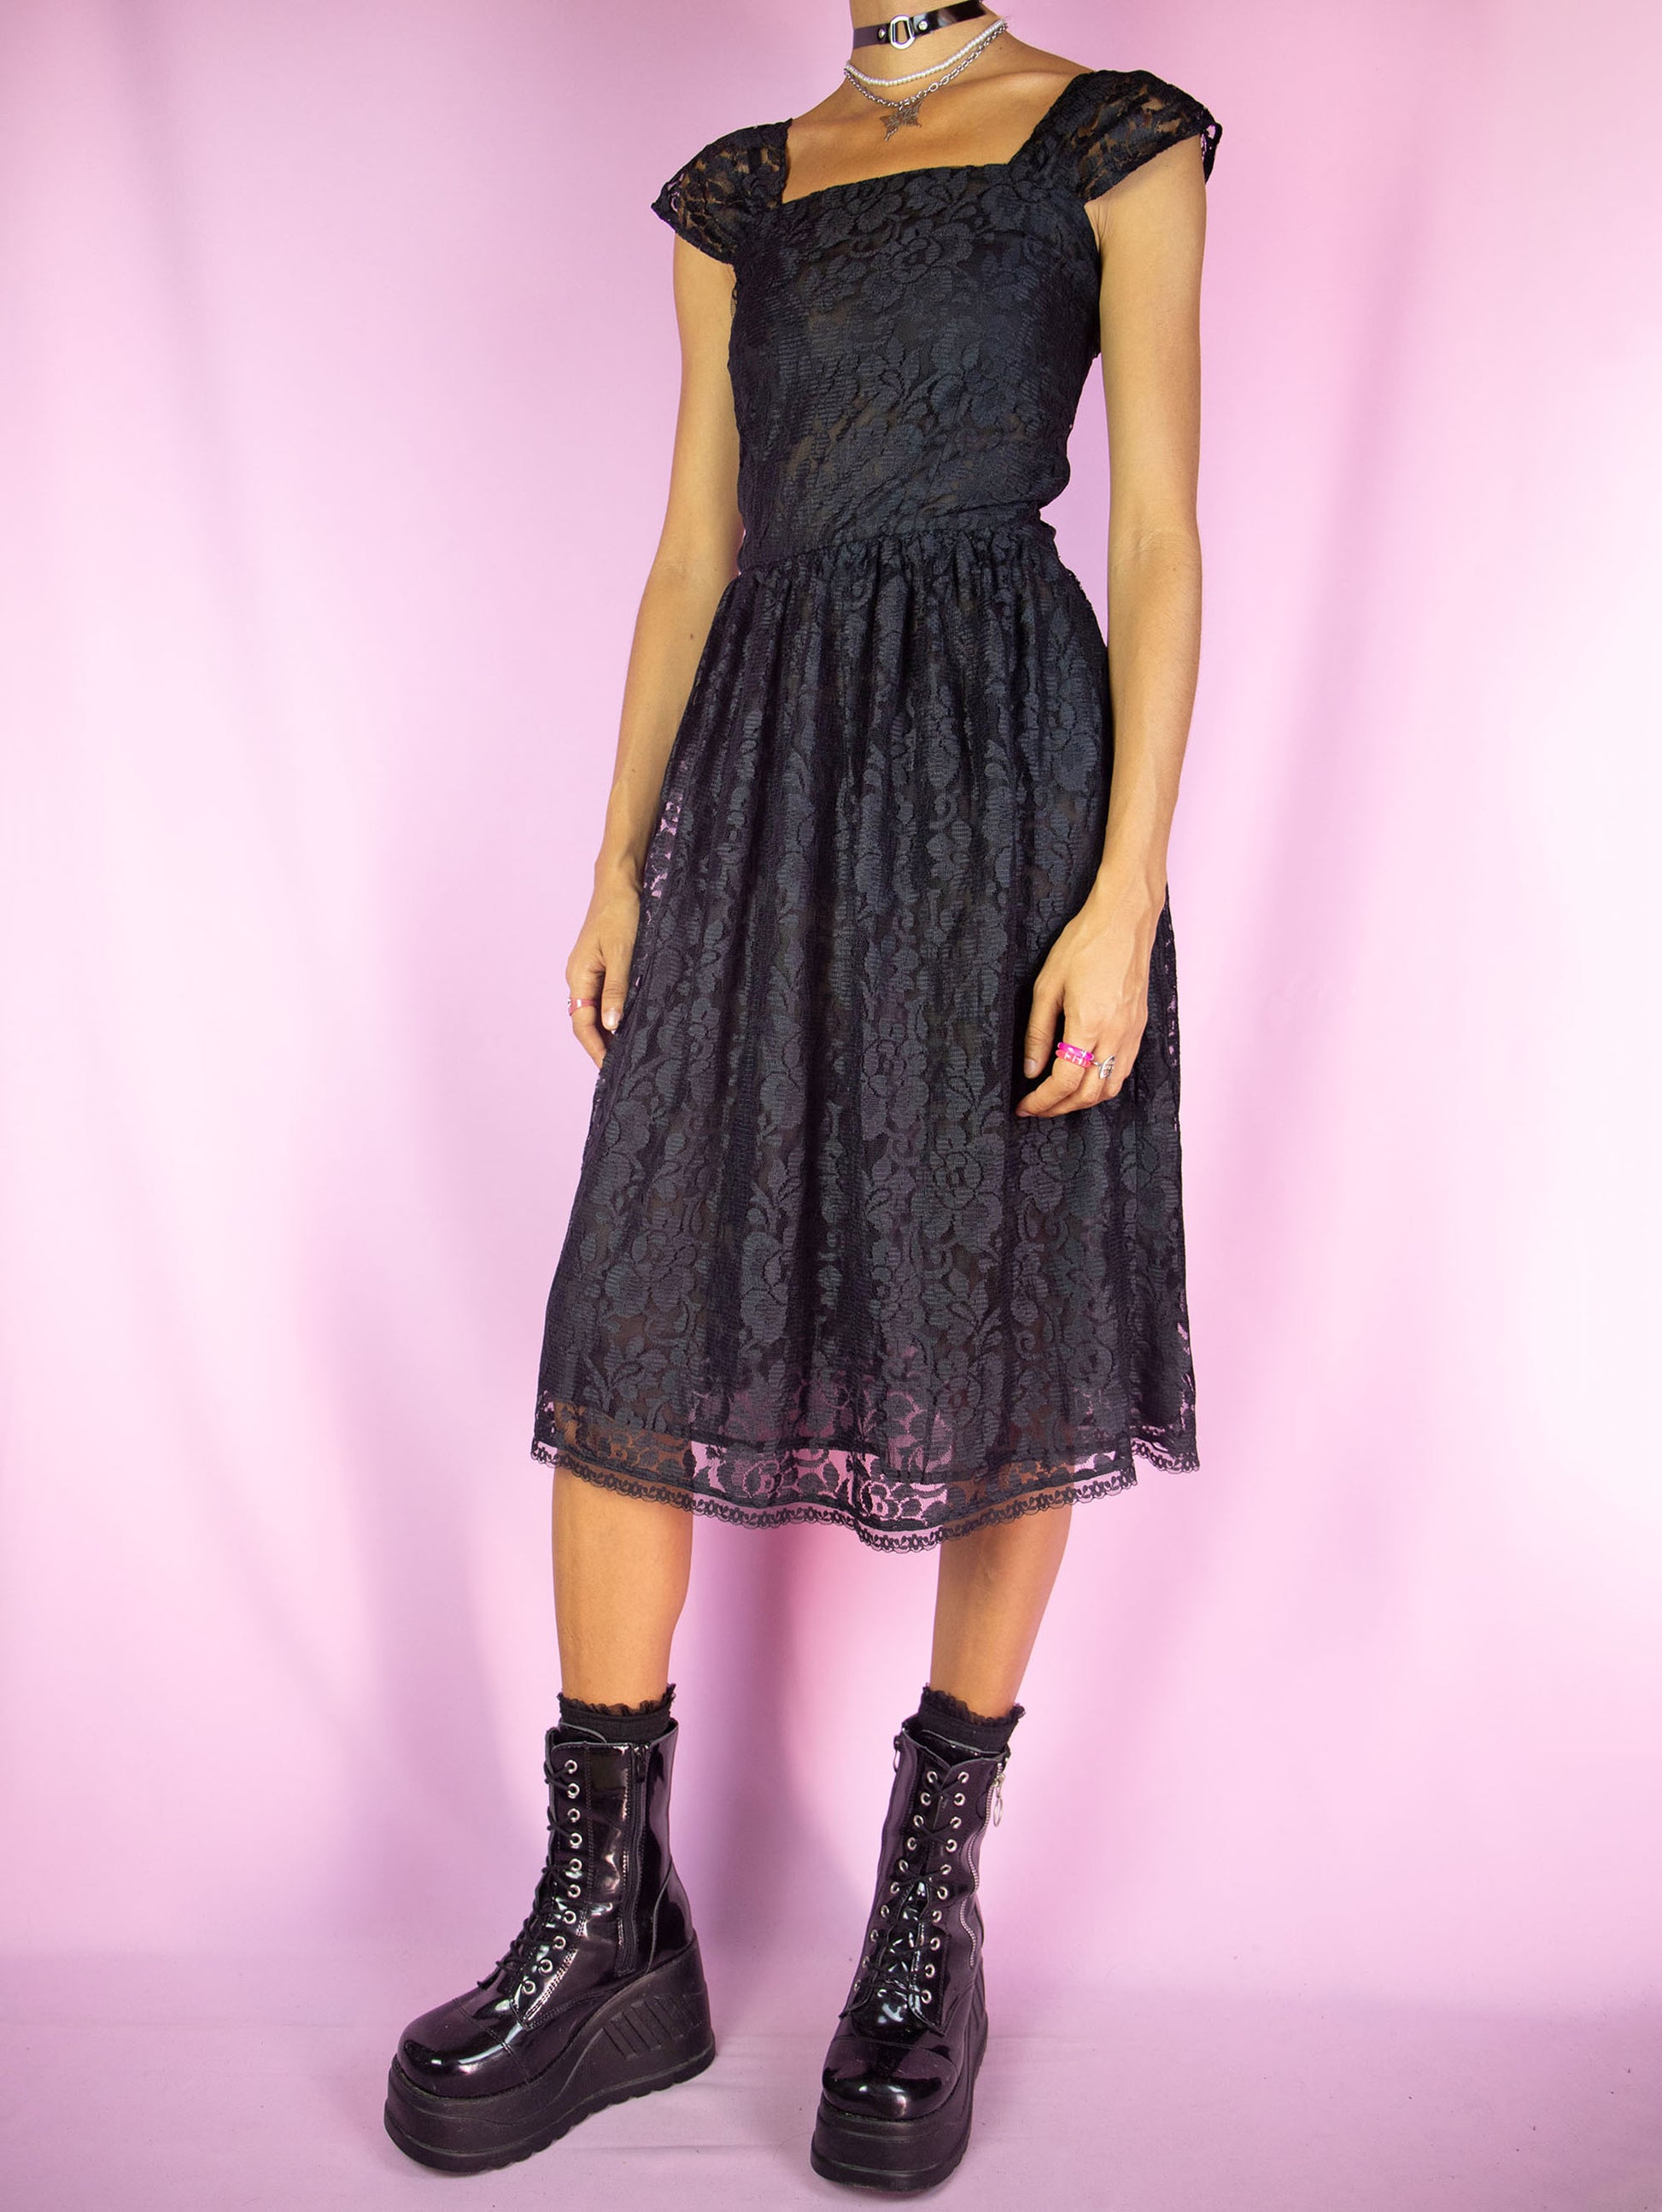 The Vintage 90s Black Lace Midi Dress is a sleeveless flare semi-sheer black lace dress with side zipper closure. Dark romantic whimsygoth 1990s party night dress.